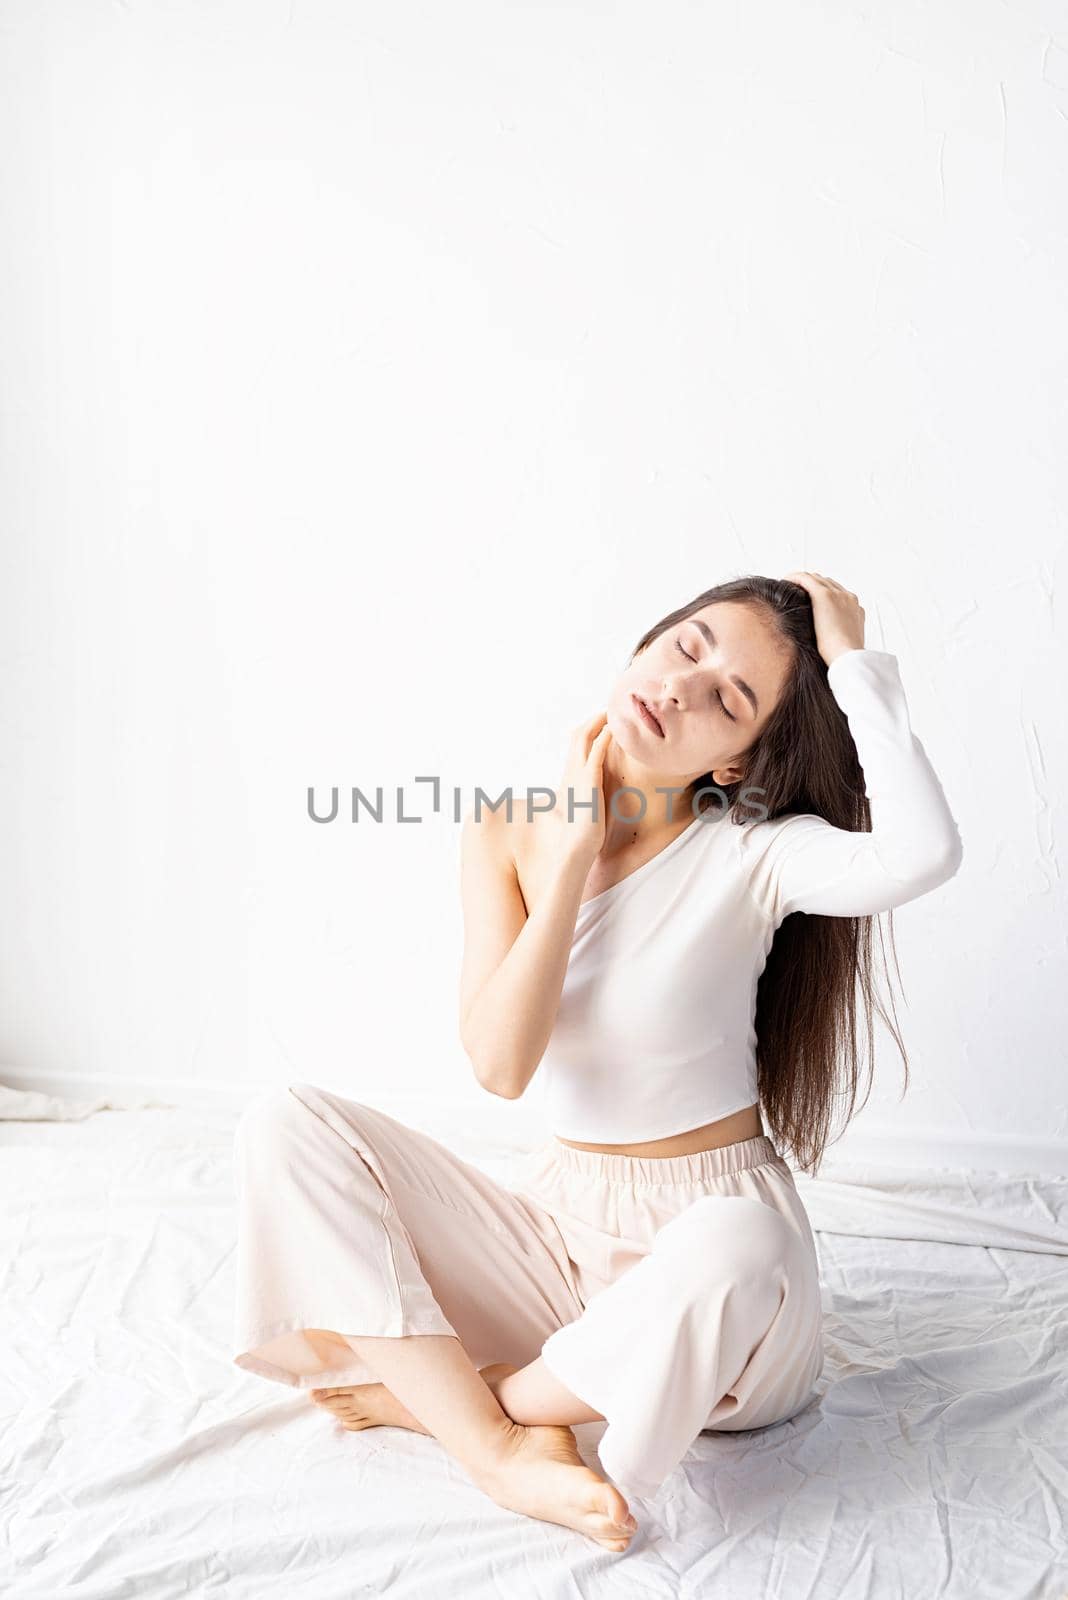 Light and airy. Portrait of beautiful woman in white cozy clothes sitting on the floor looking away